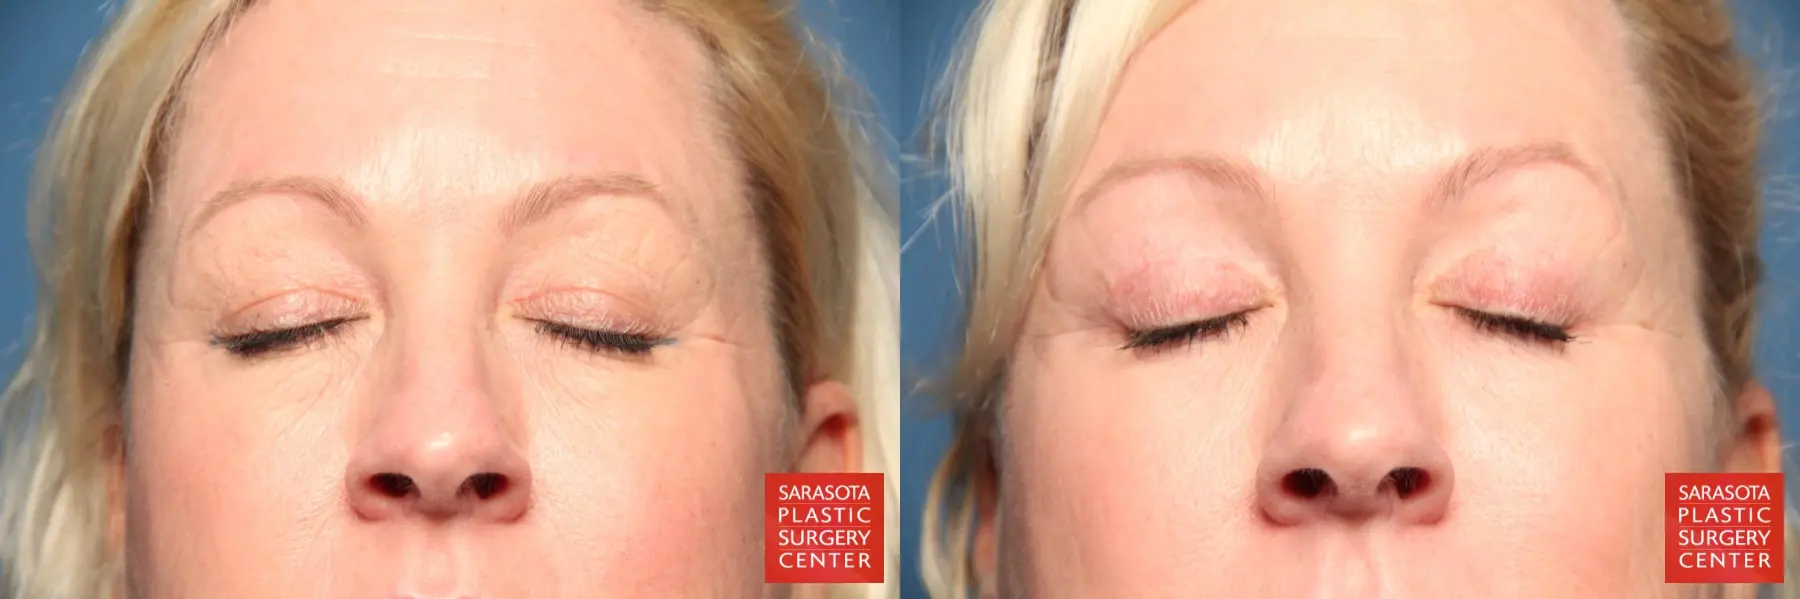 Eyelid Lift: Patient 4 - Before and After 5